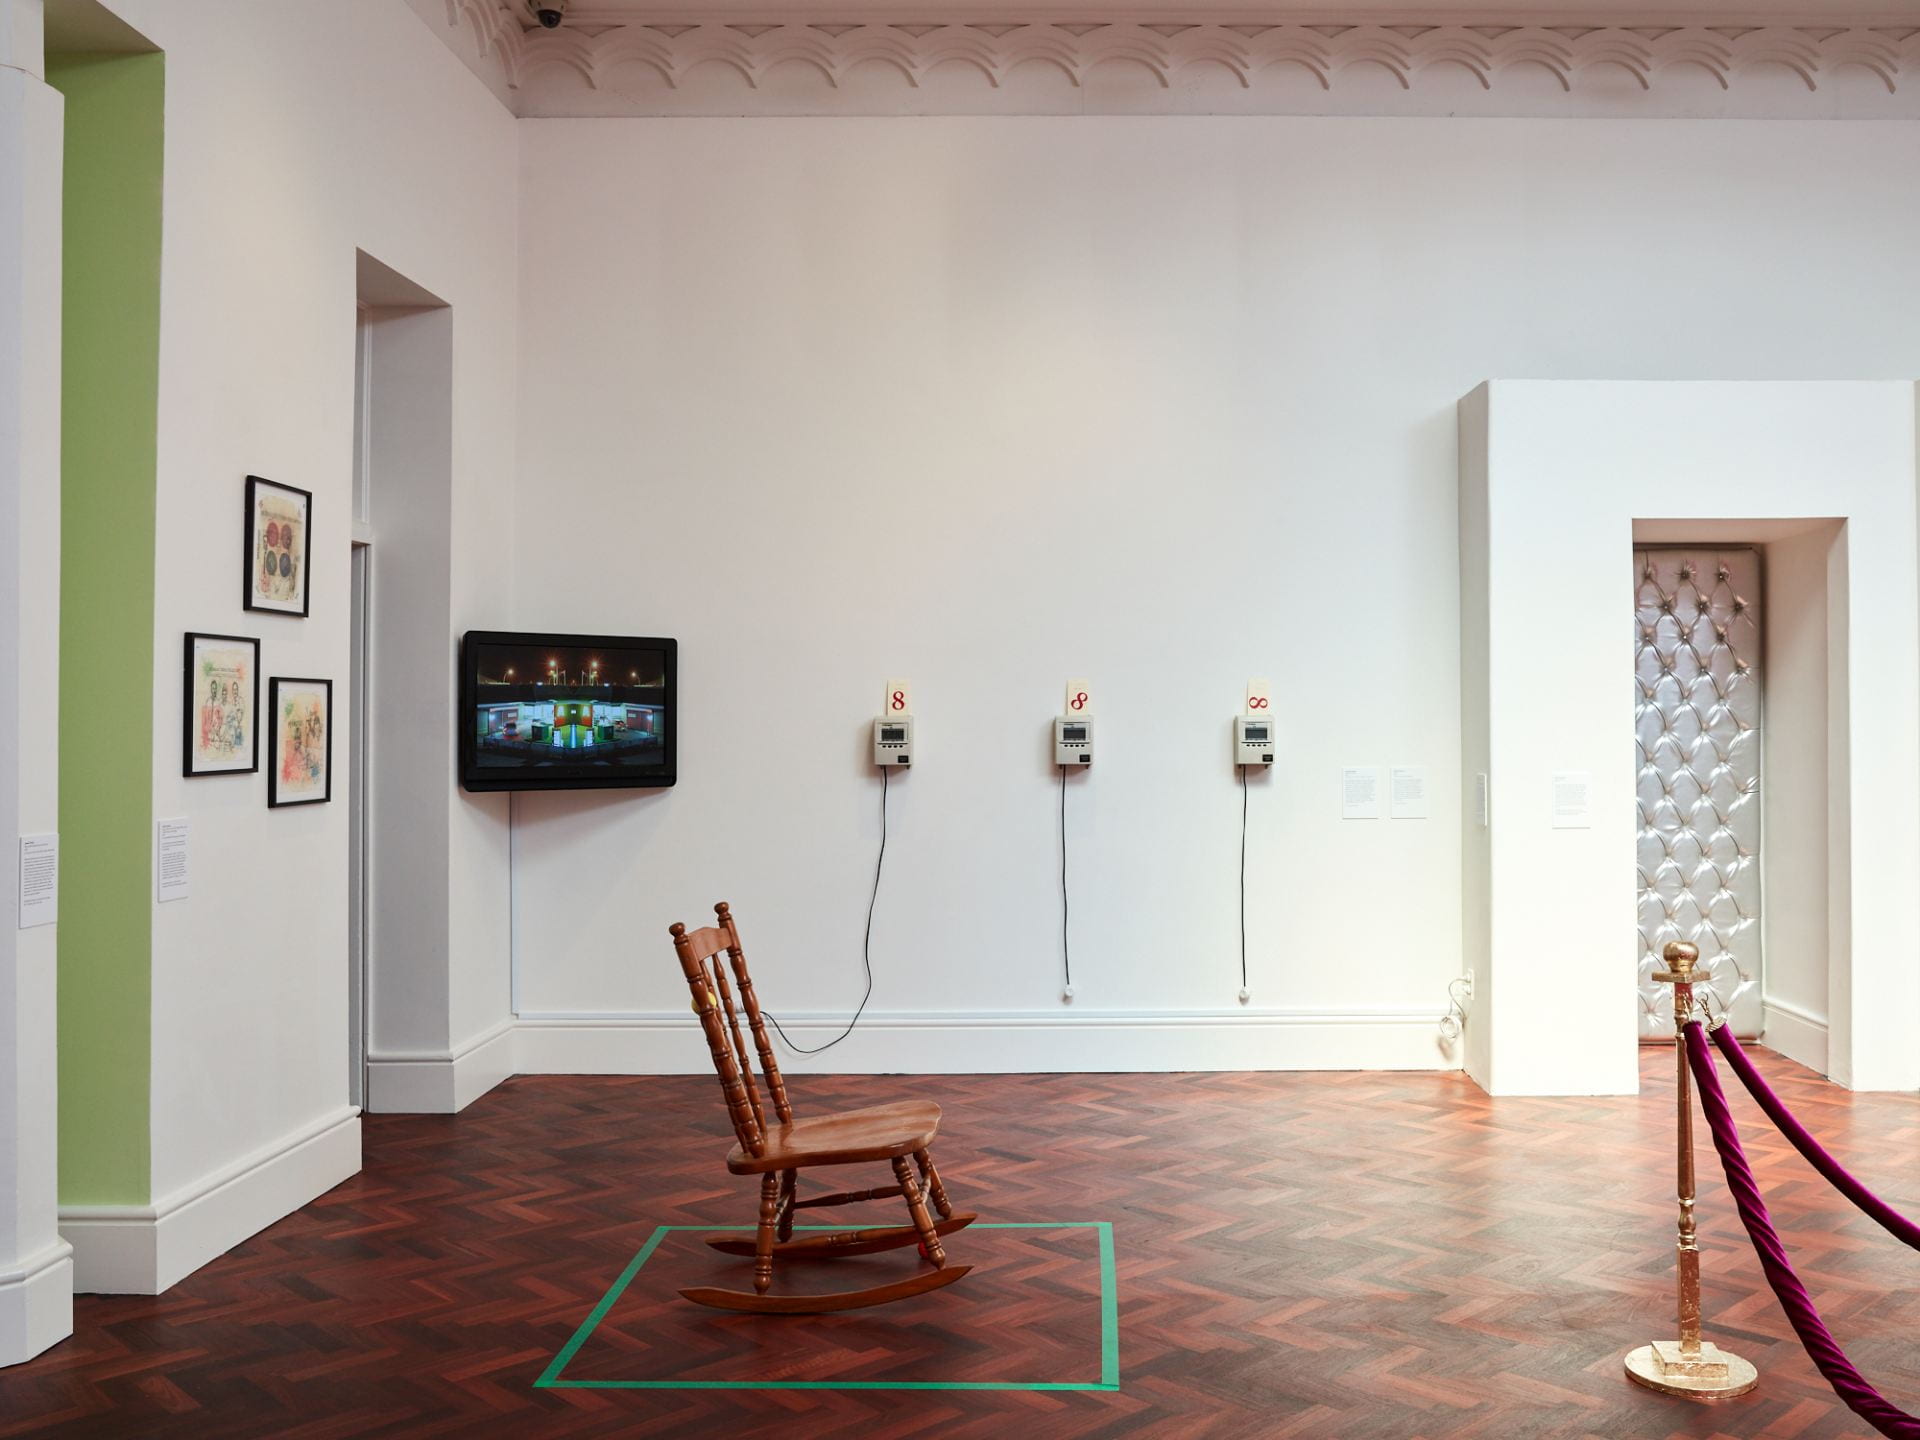 A gallery space with white walls and wooden floor. A rocking chair sits on the floor, a stress ball wedged under one rocker. A TV, three timestamp clocks and a booth space are all visible in the background.